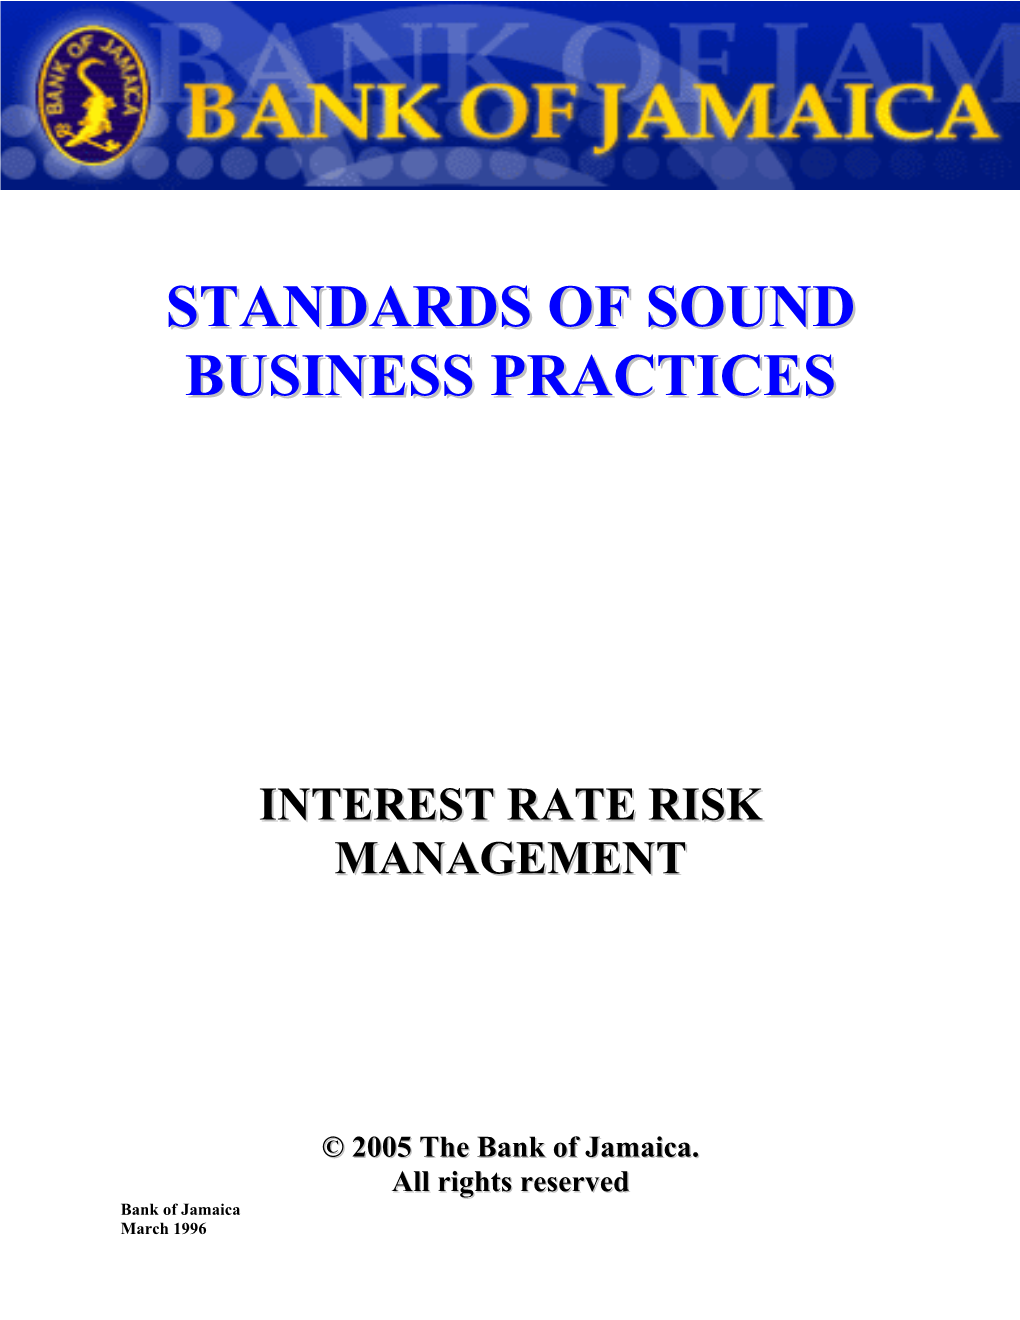 Interest Rate Risk Management Page 2